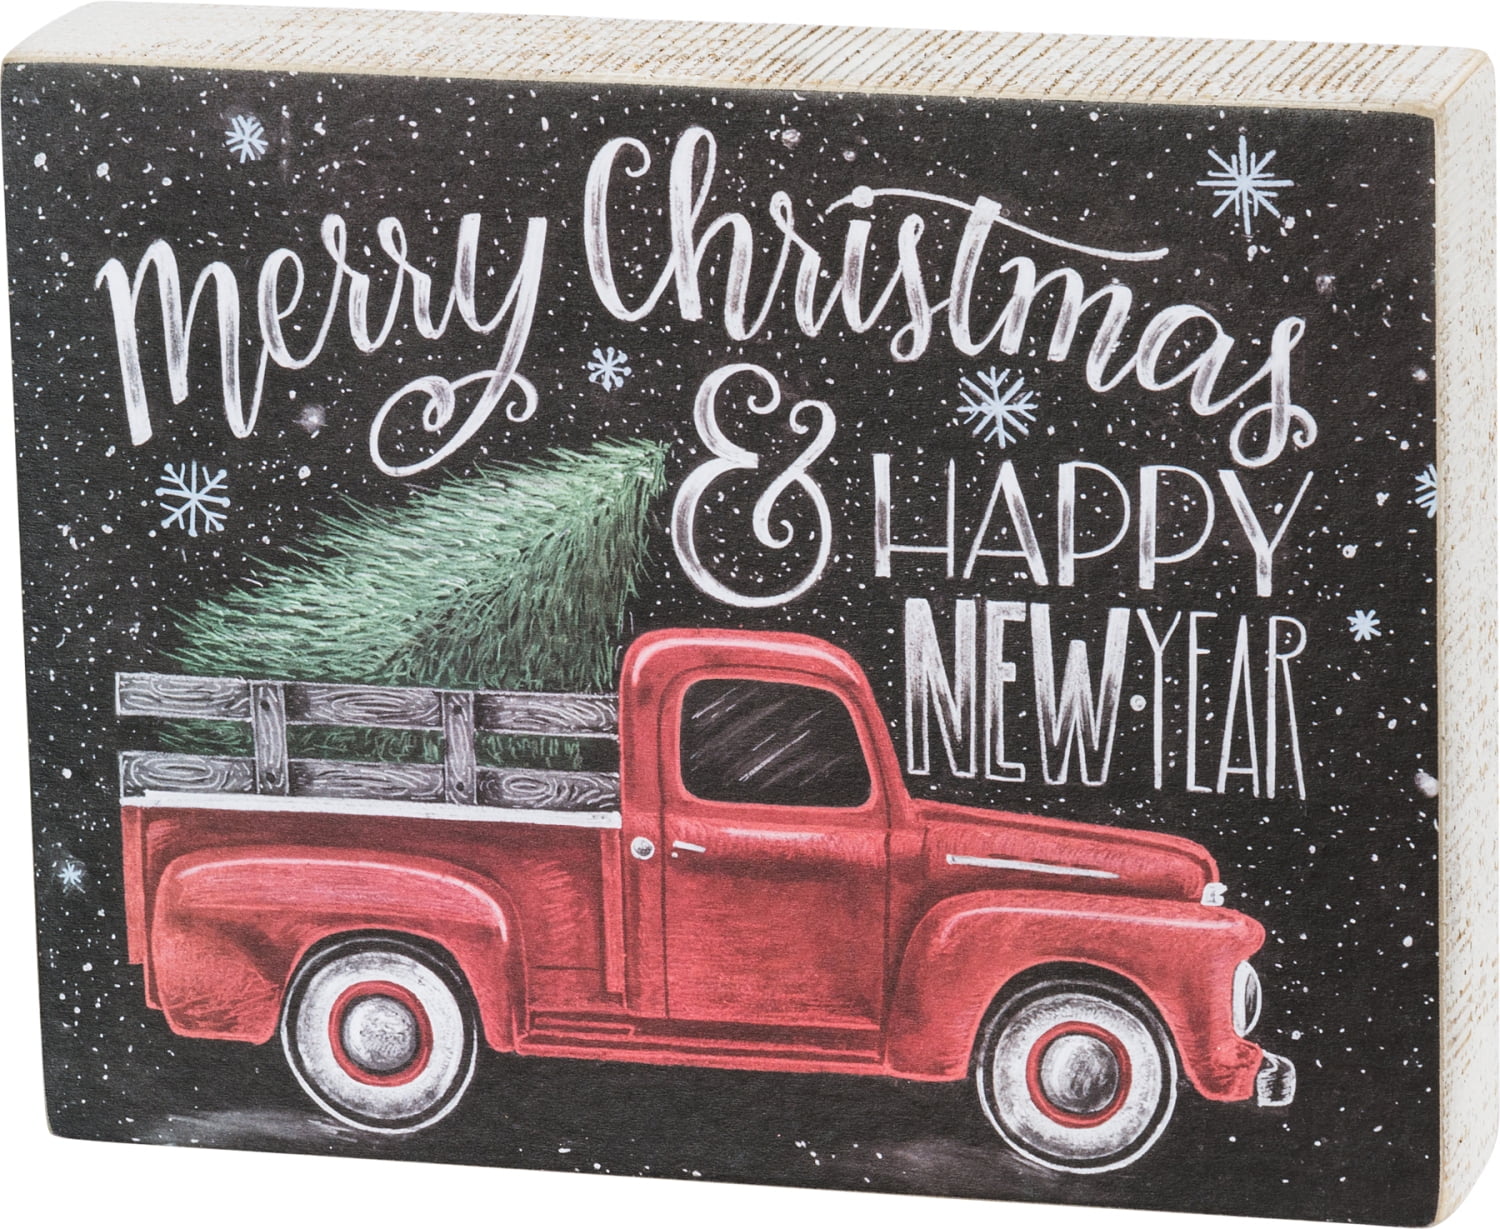 Merry Christmas Special Delivery Wooden Sign Red Car Truck Cute 